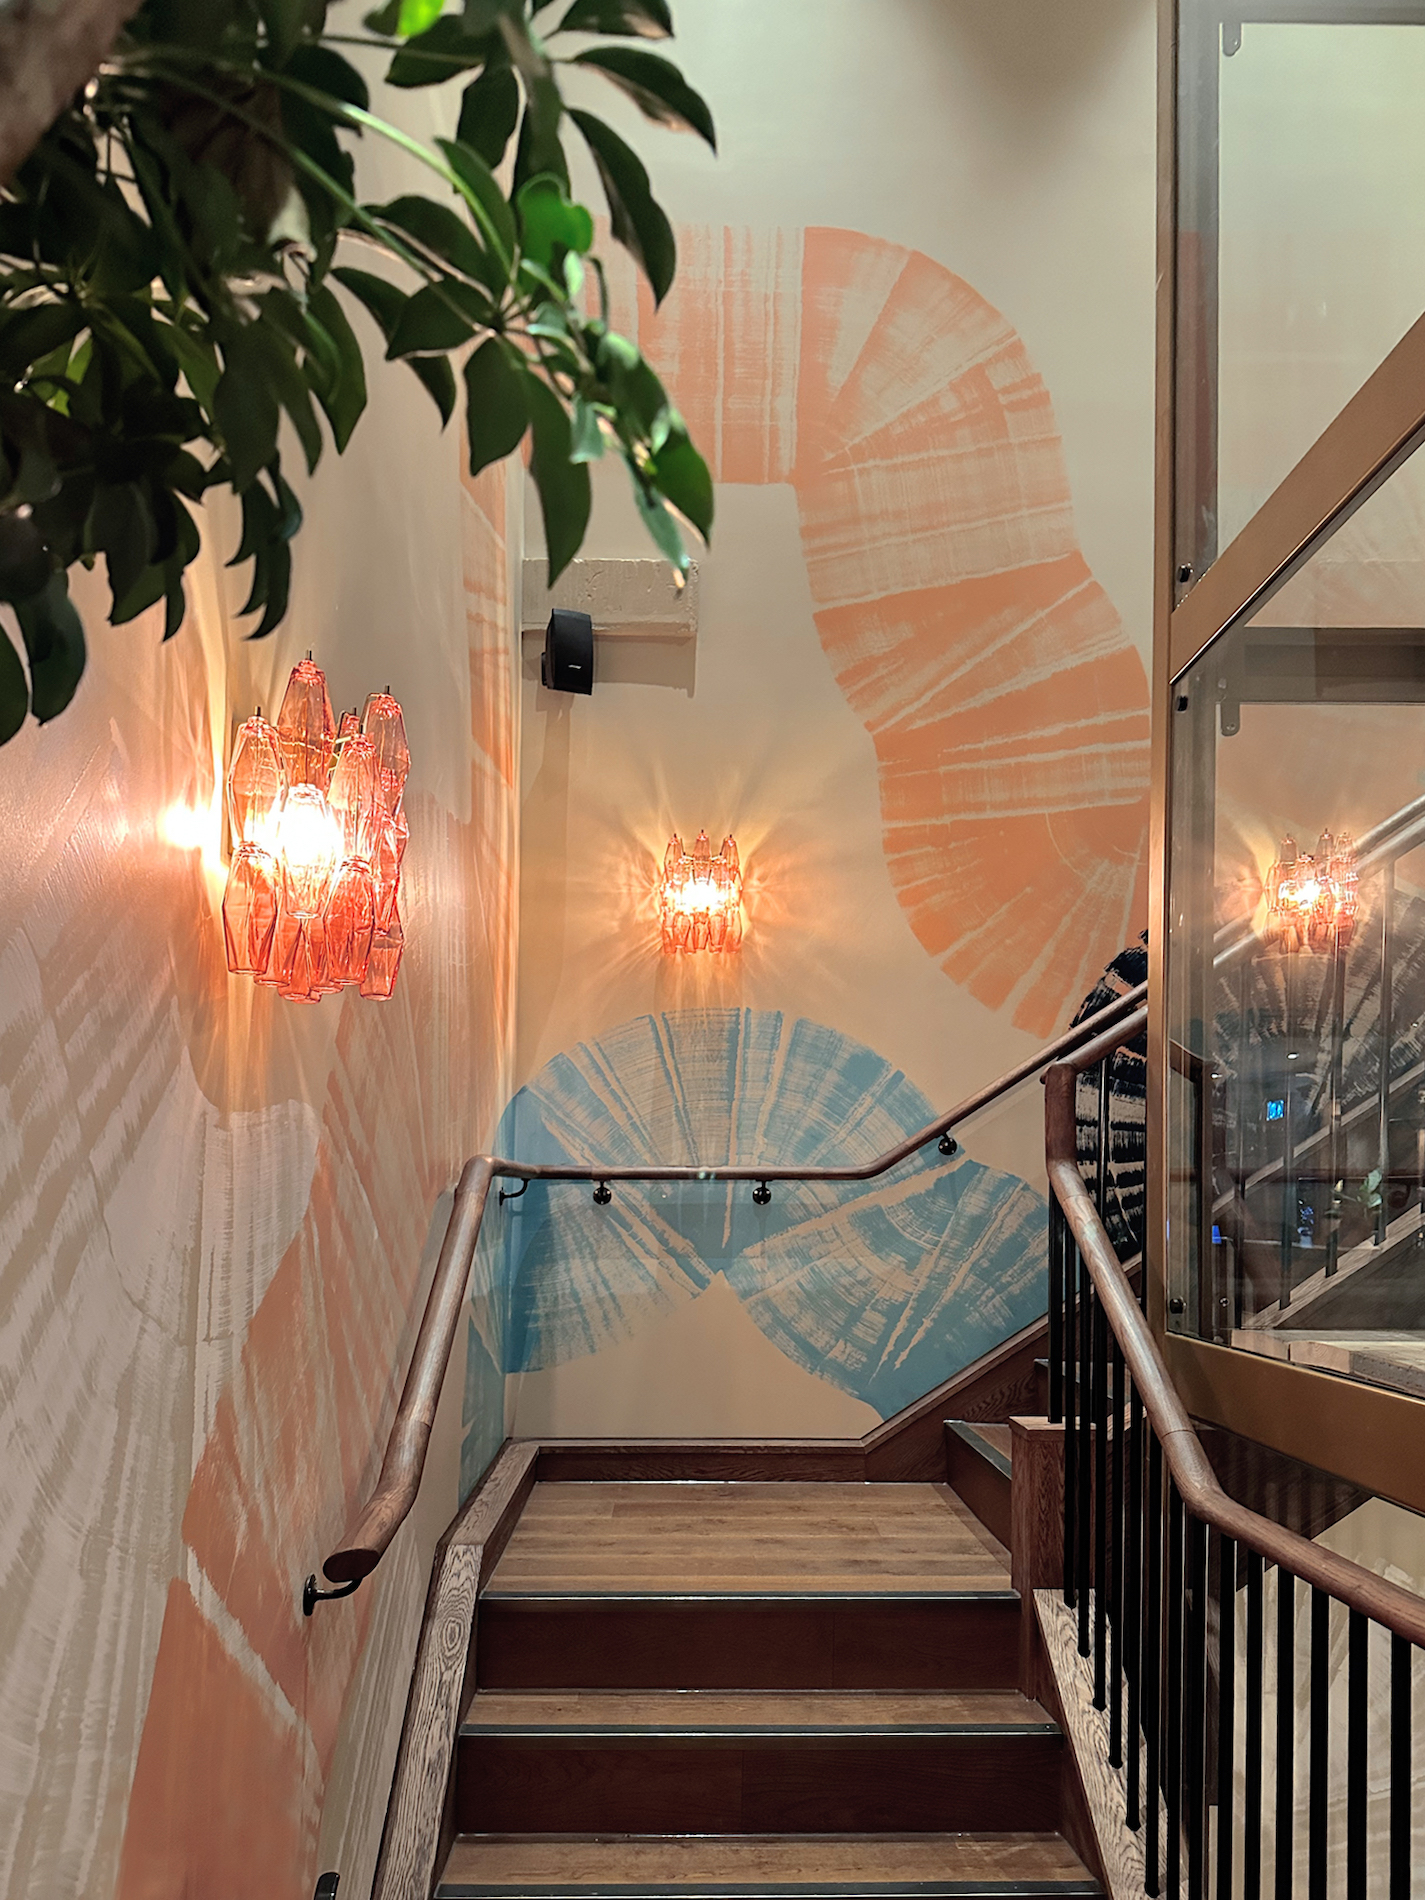 Run for the Hills created a hand-painted mural for the Townhouse in Guildford, Surrey - Effect Magazine